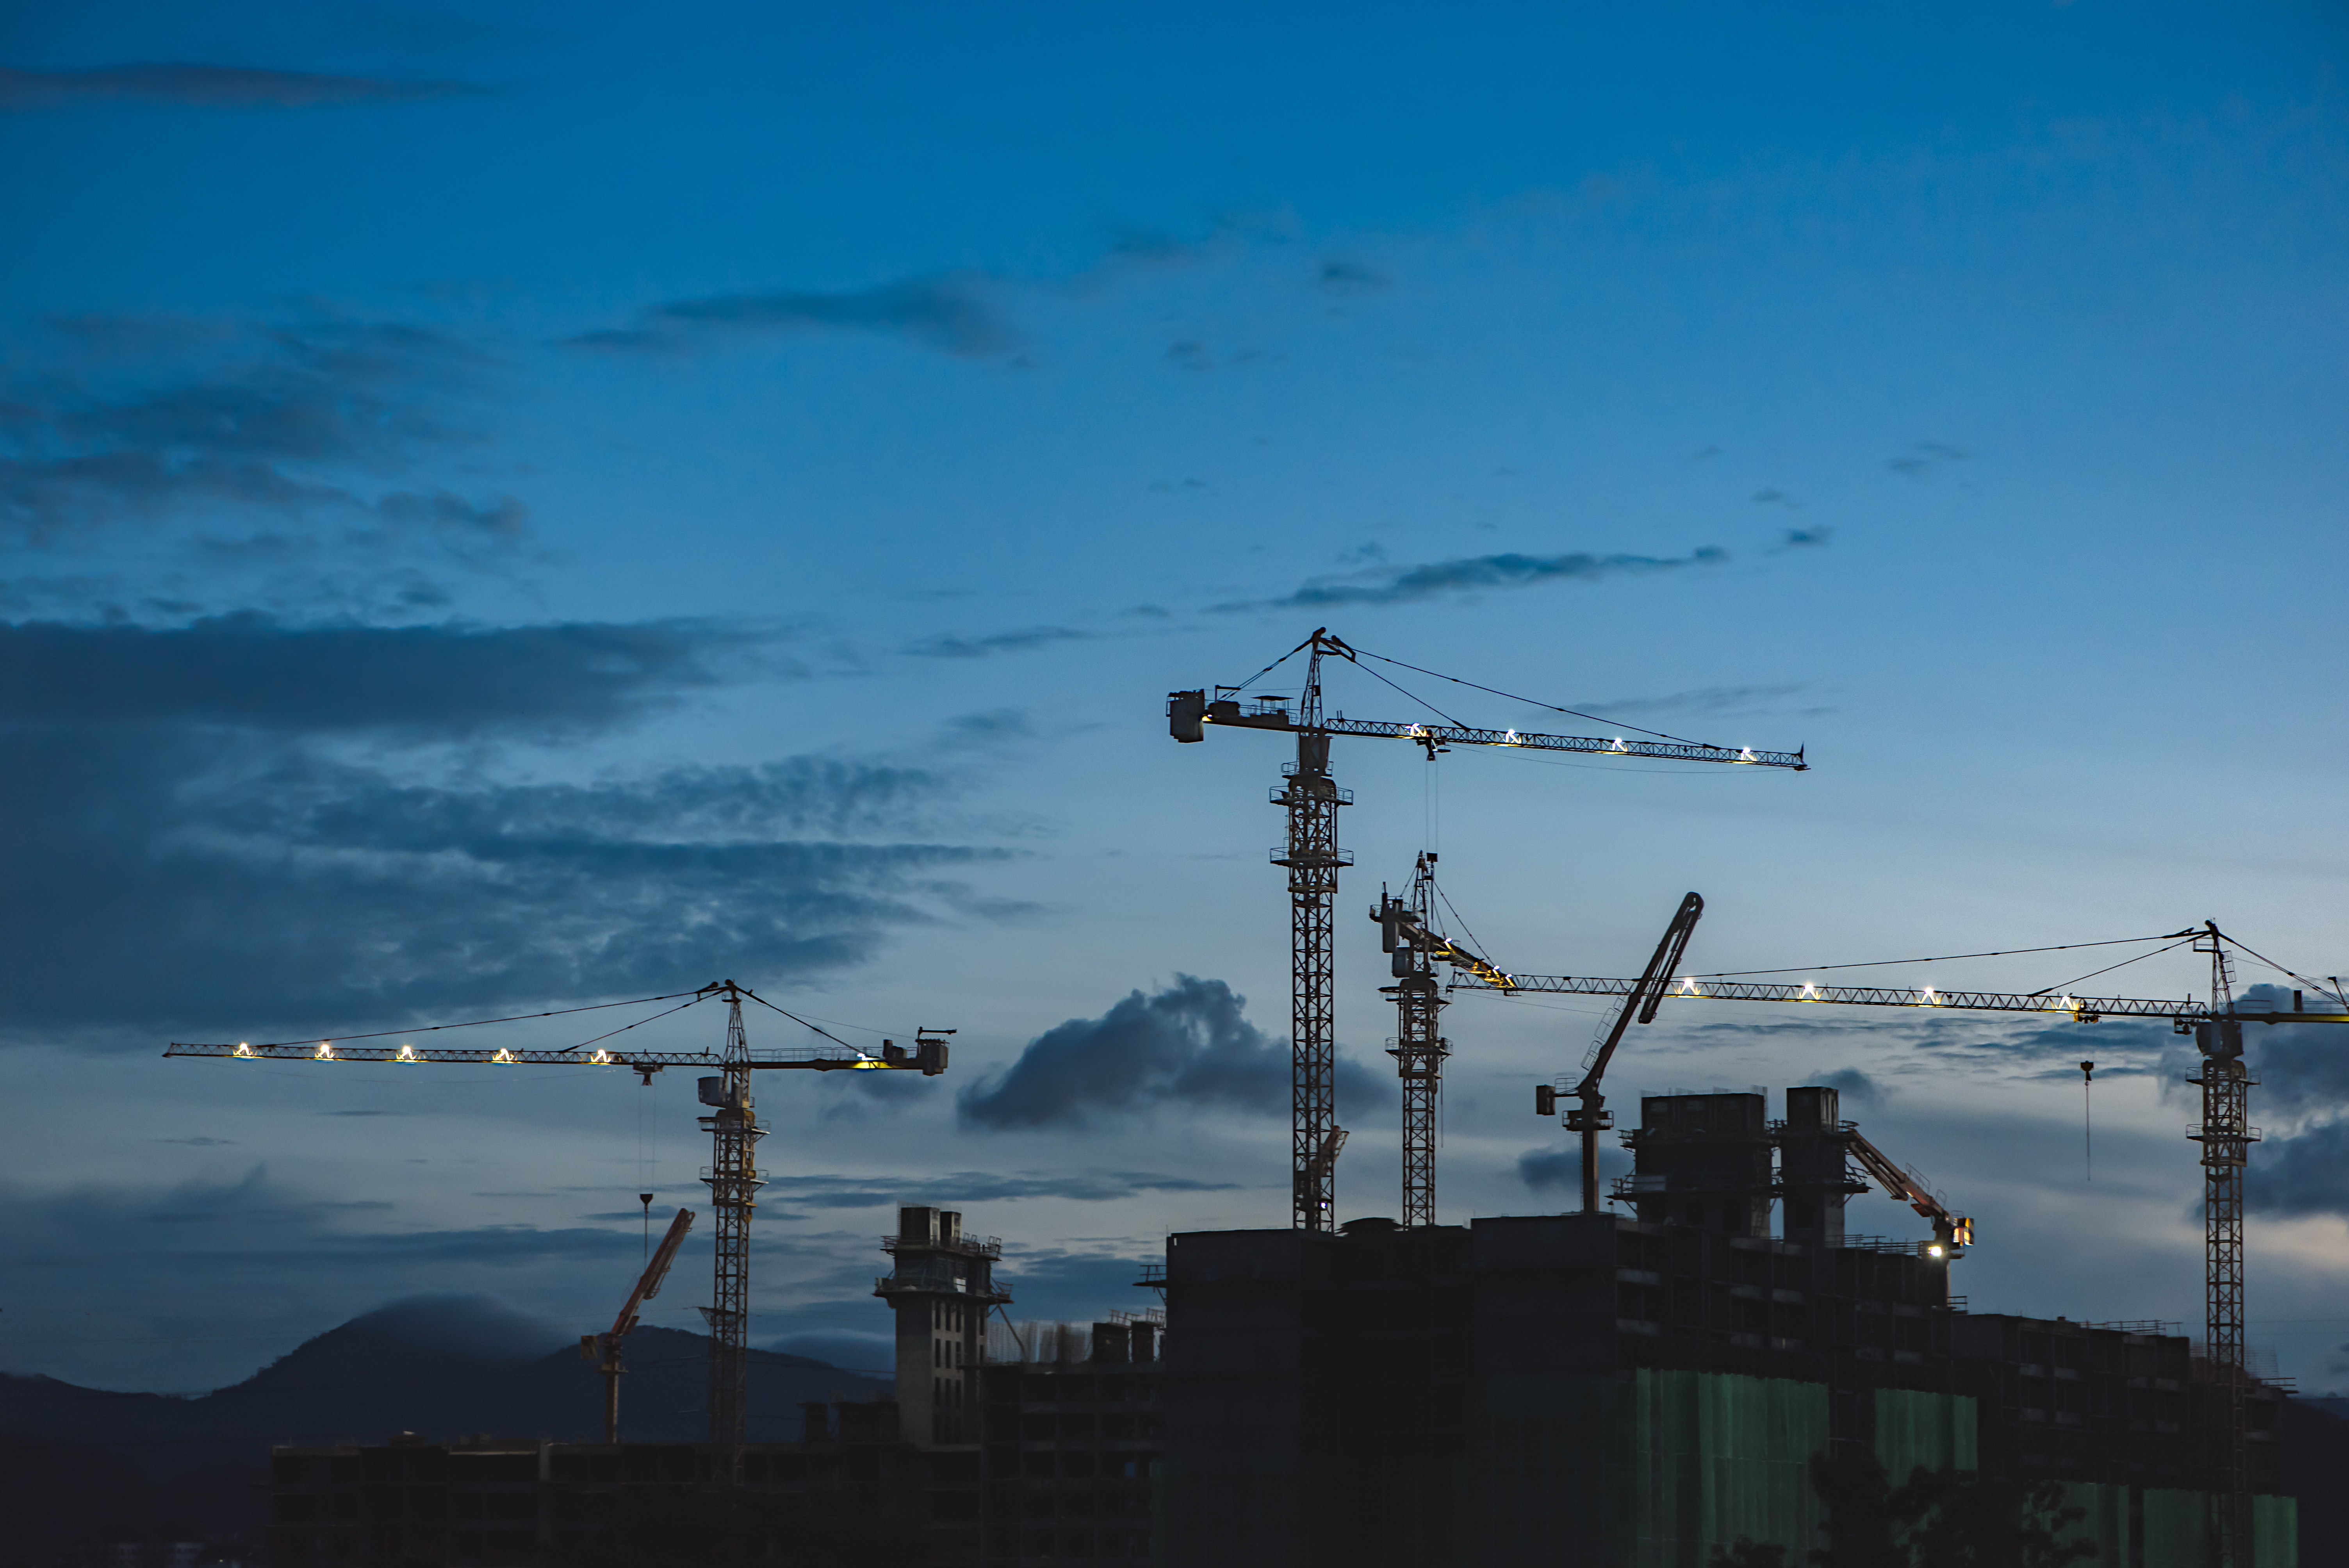 Construction site with cranes at dusk